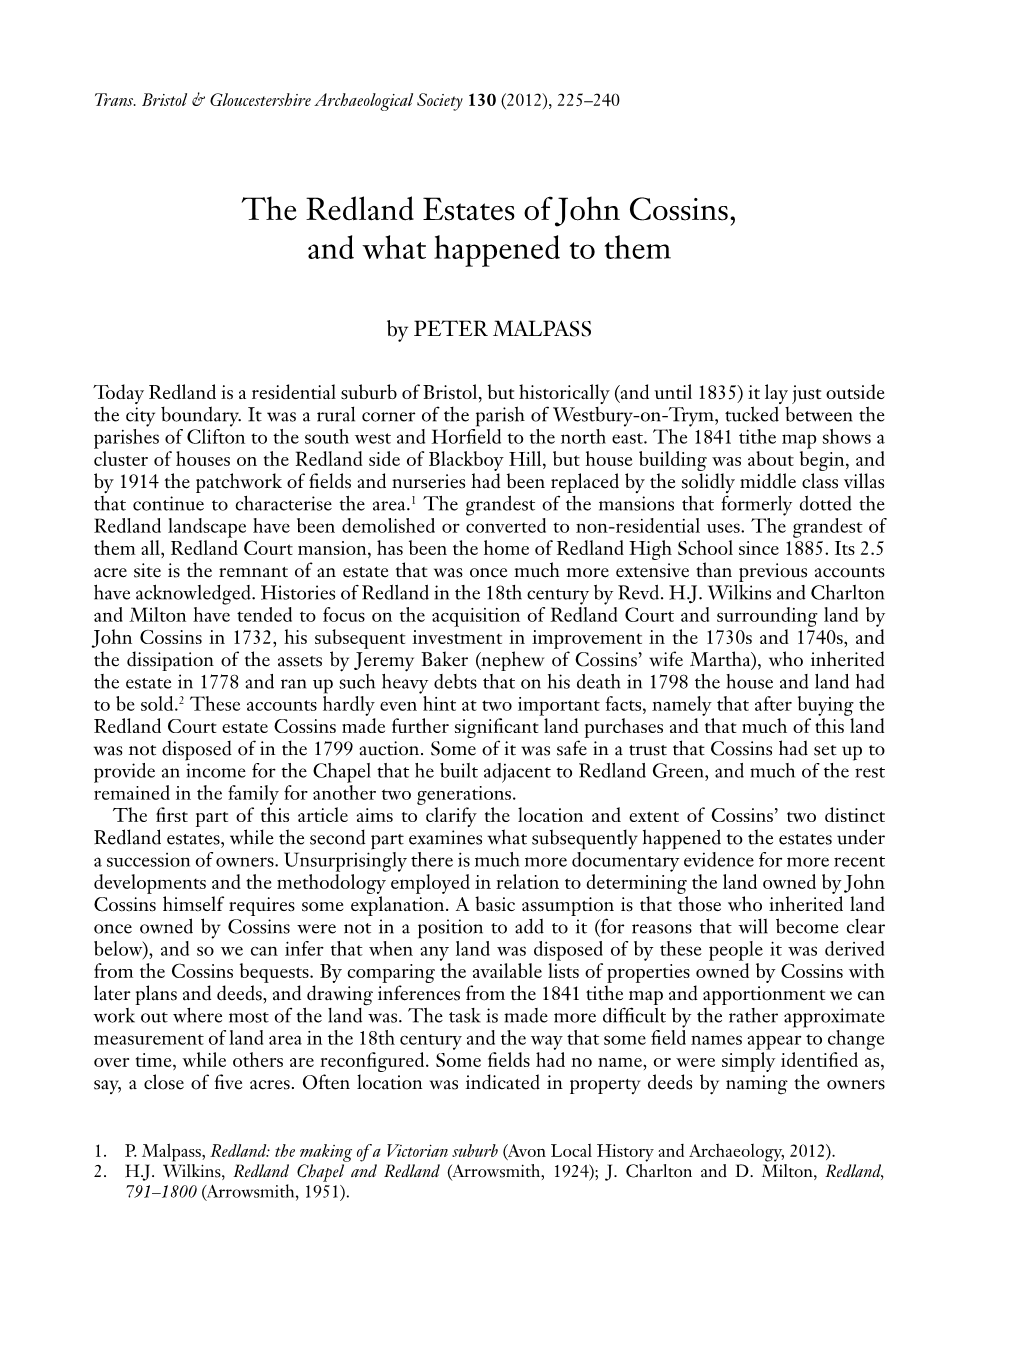 The Redland Estates of John Cossins, and What Happened to Them